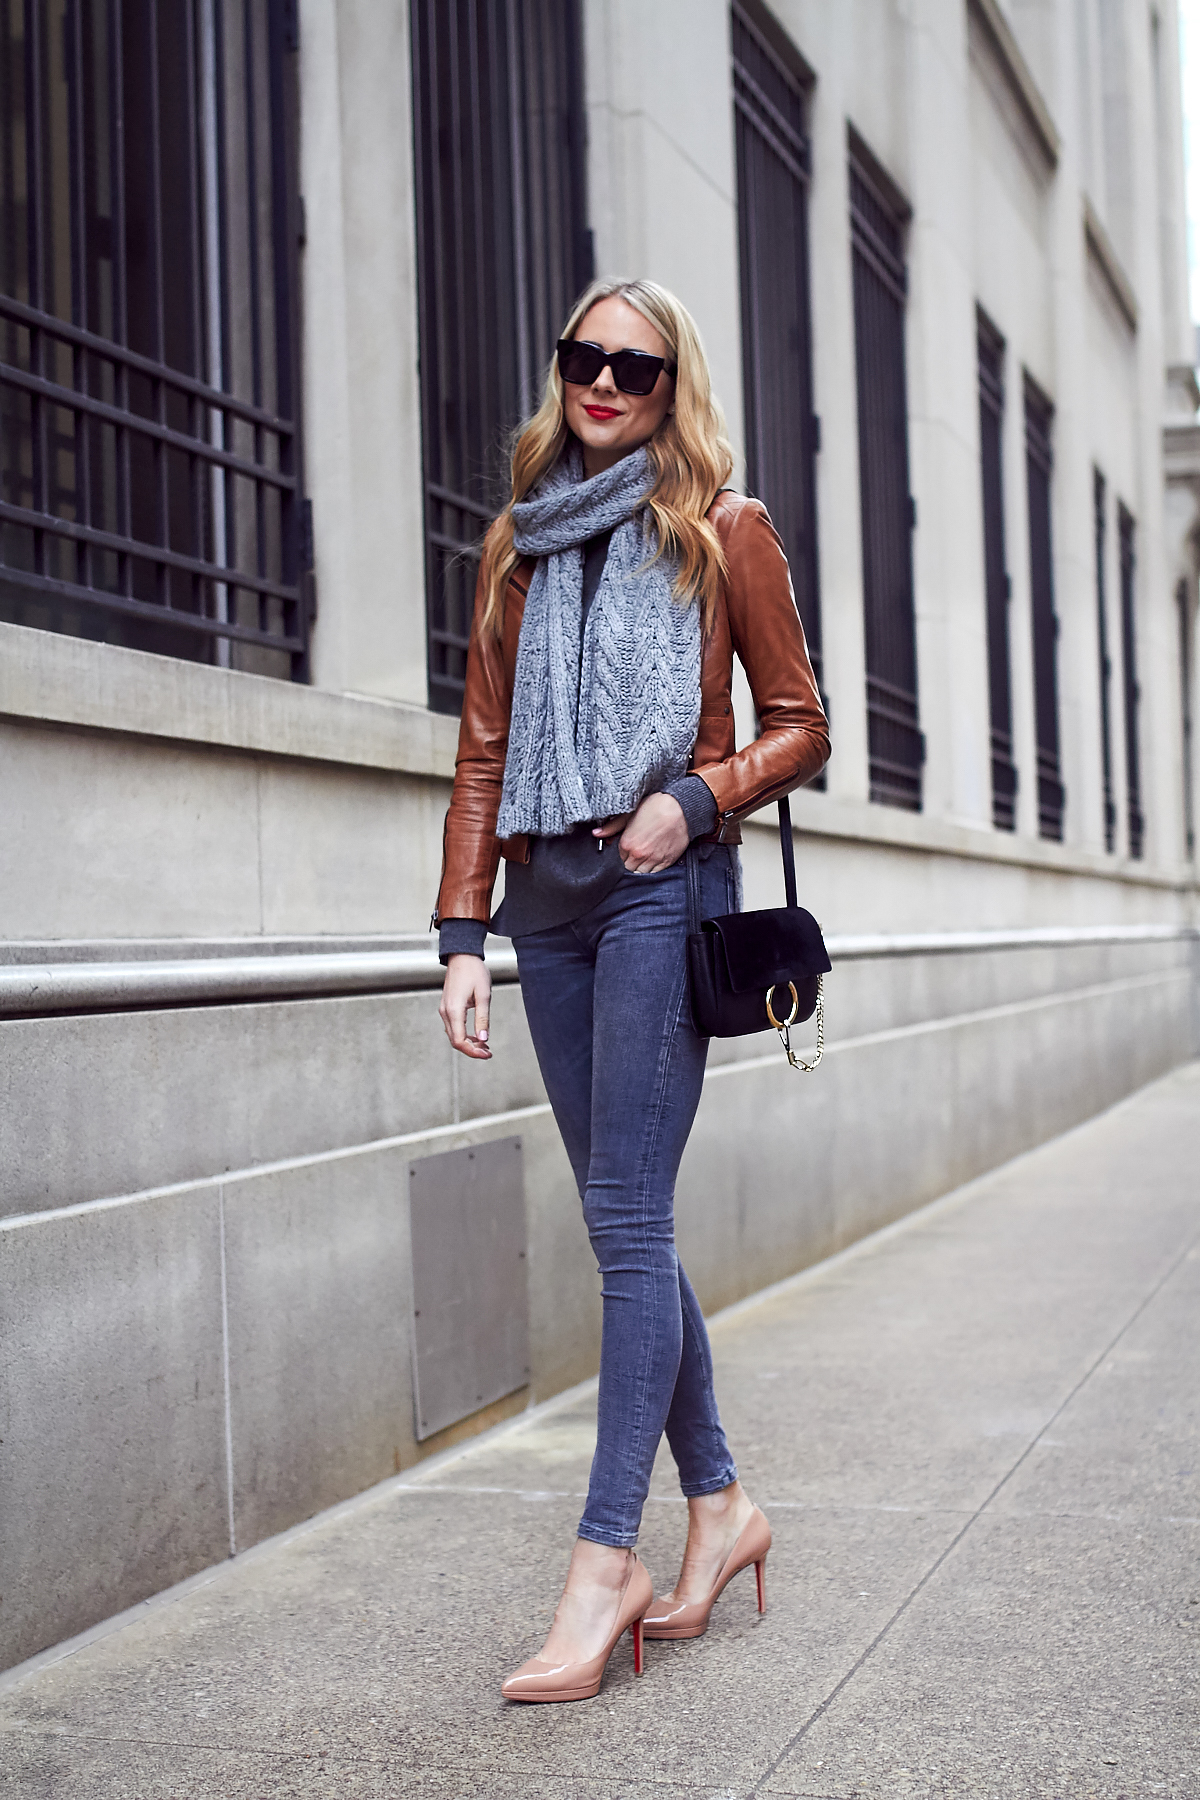 Fall Outfit, Winter Outfit, Grey Knit Scarf, Tan Faux Leather Jacket, Grey Skinny Jeans, Nude Pumps